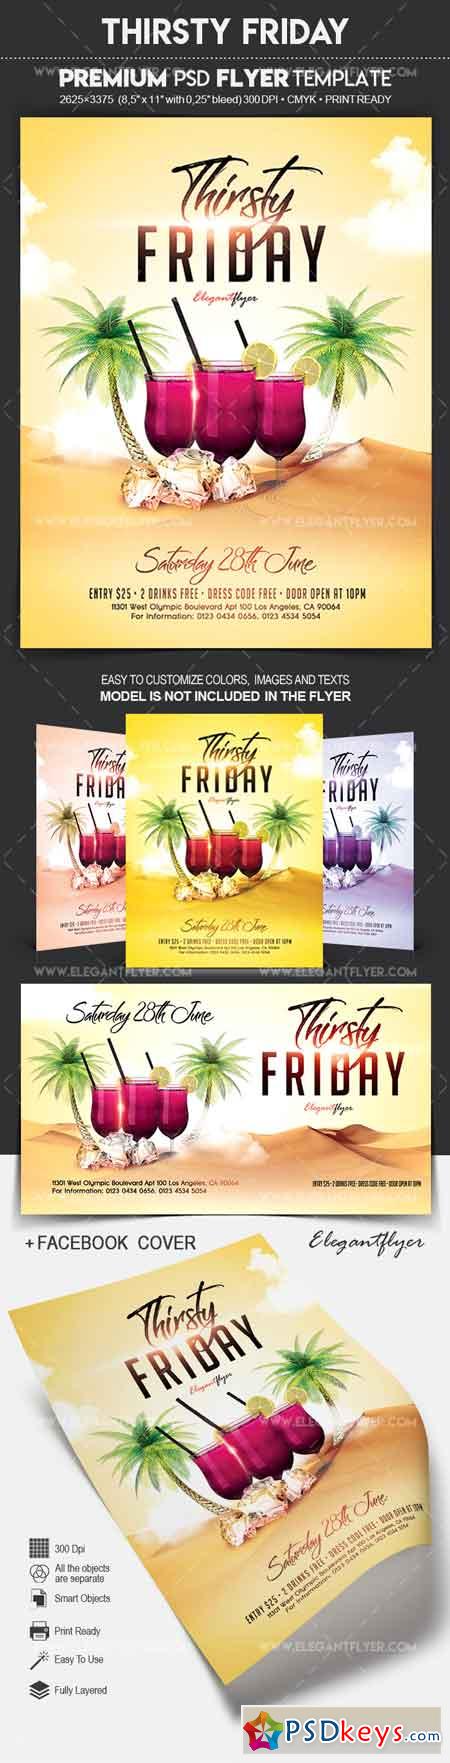 Thirsty Friday  Flyer PSD Template